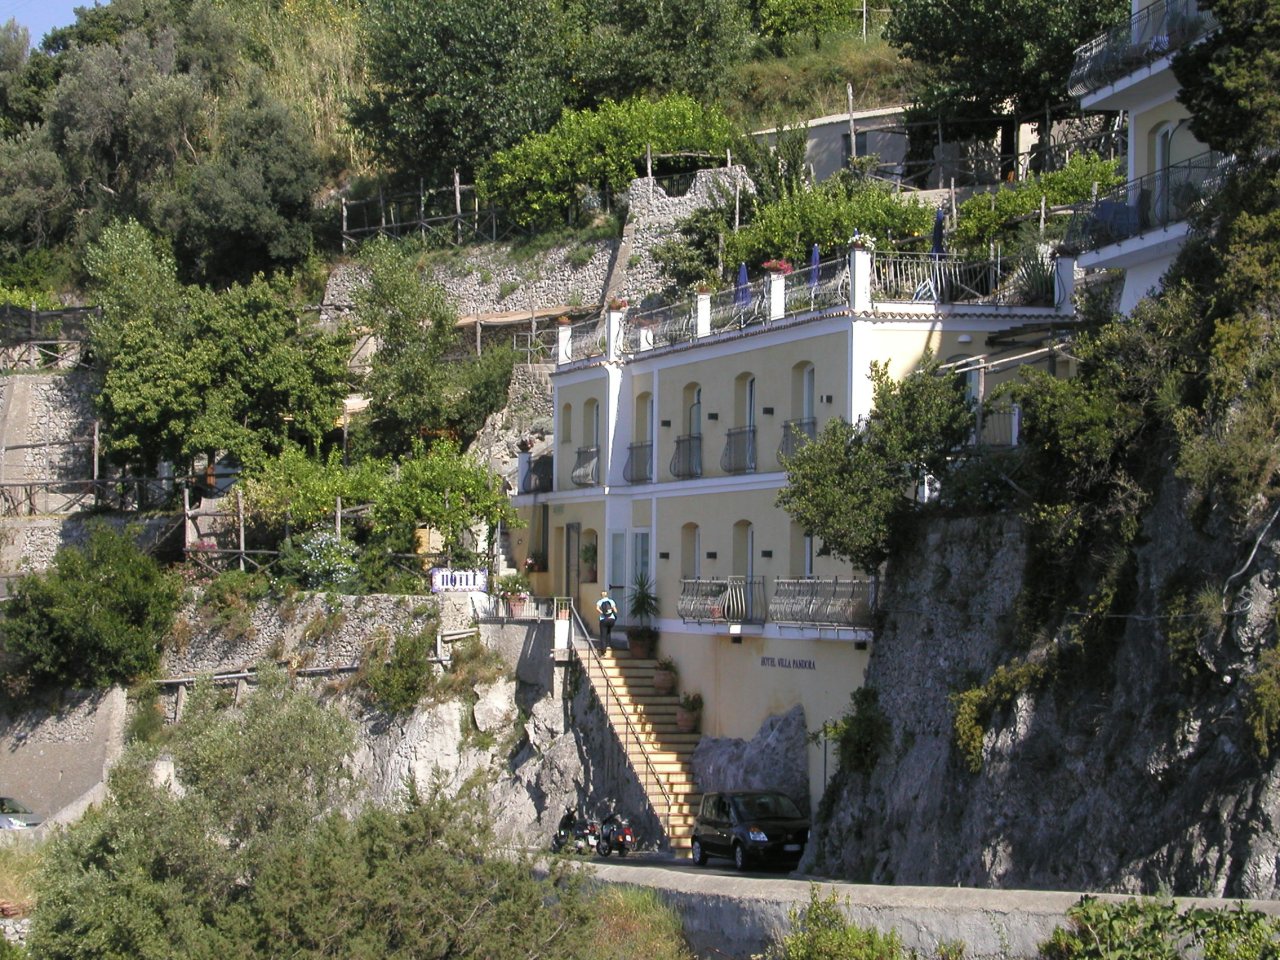 JPEG image - Minerva : Like most hotels, this one is built onto / into the rock face. The little black thing at the foot of the stairs is the rental car we had: fortunately small! ...